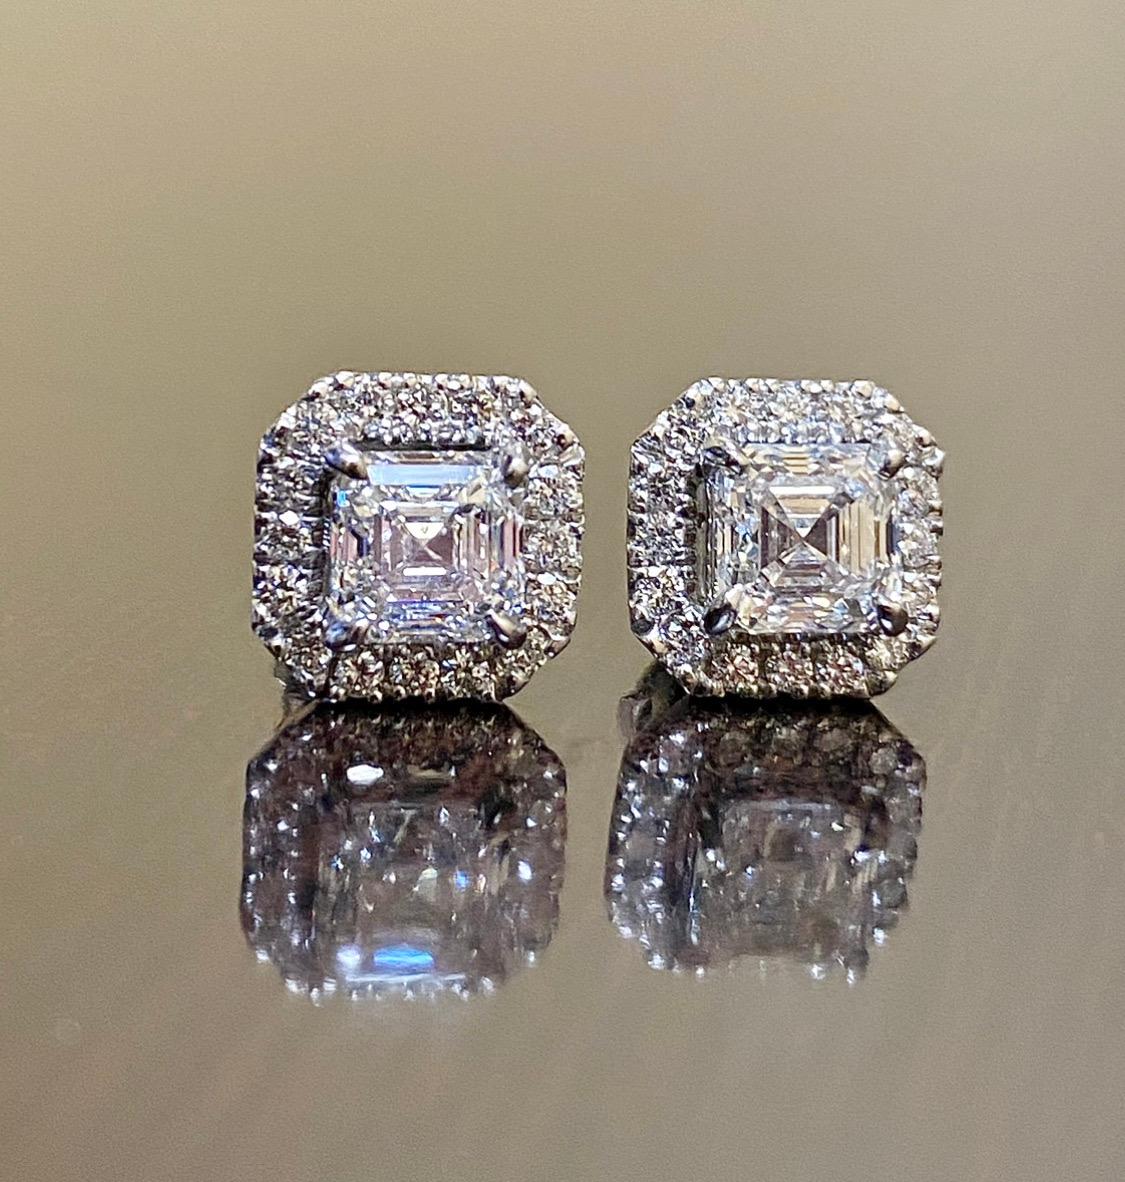 Halo Platinum GIA Certified 2.22 Carat F Color Asscher Cut Diamond Earrings In New Condition For Sale In Los Angeles, CA